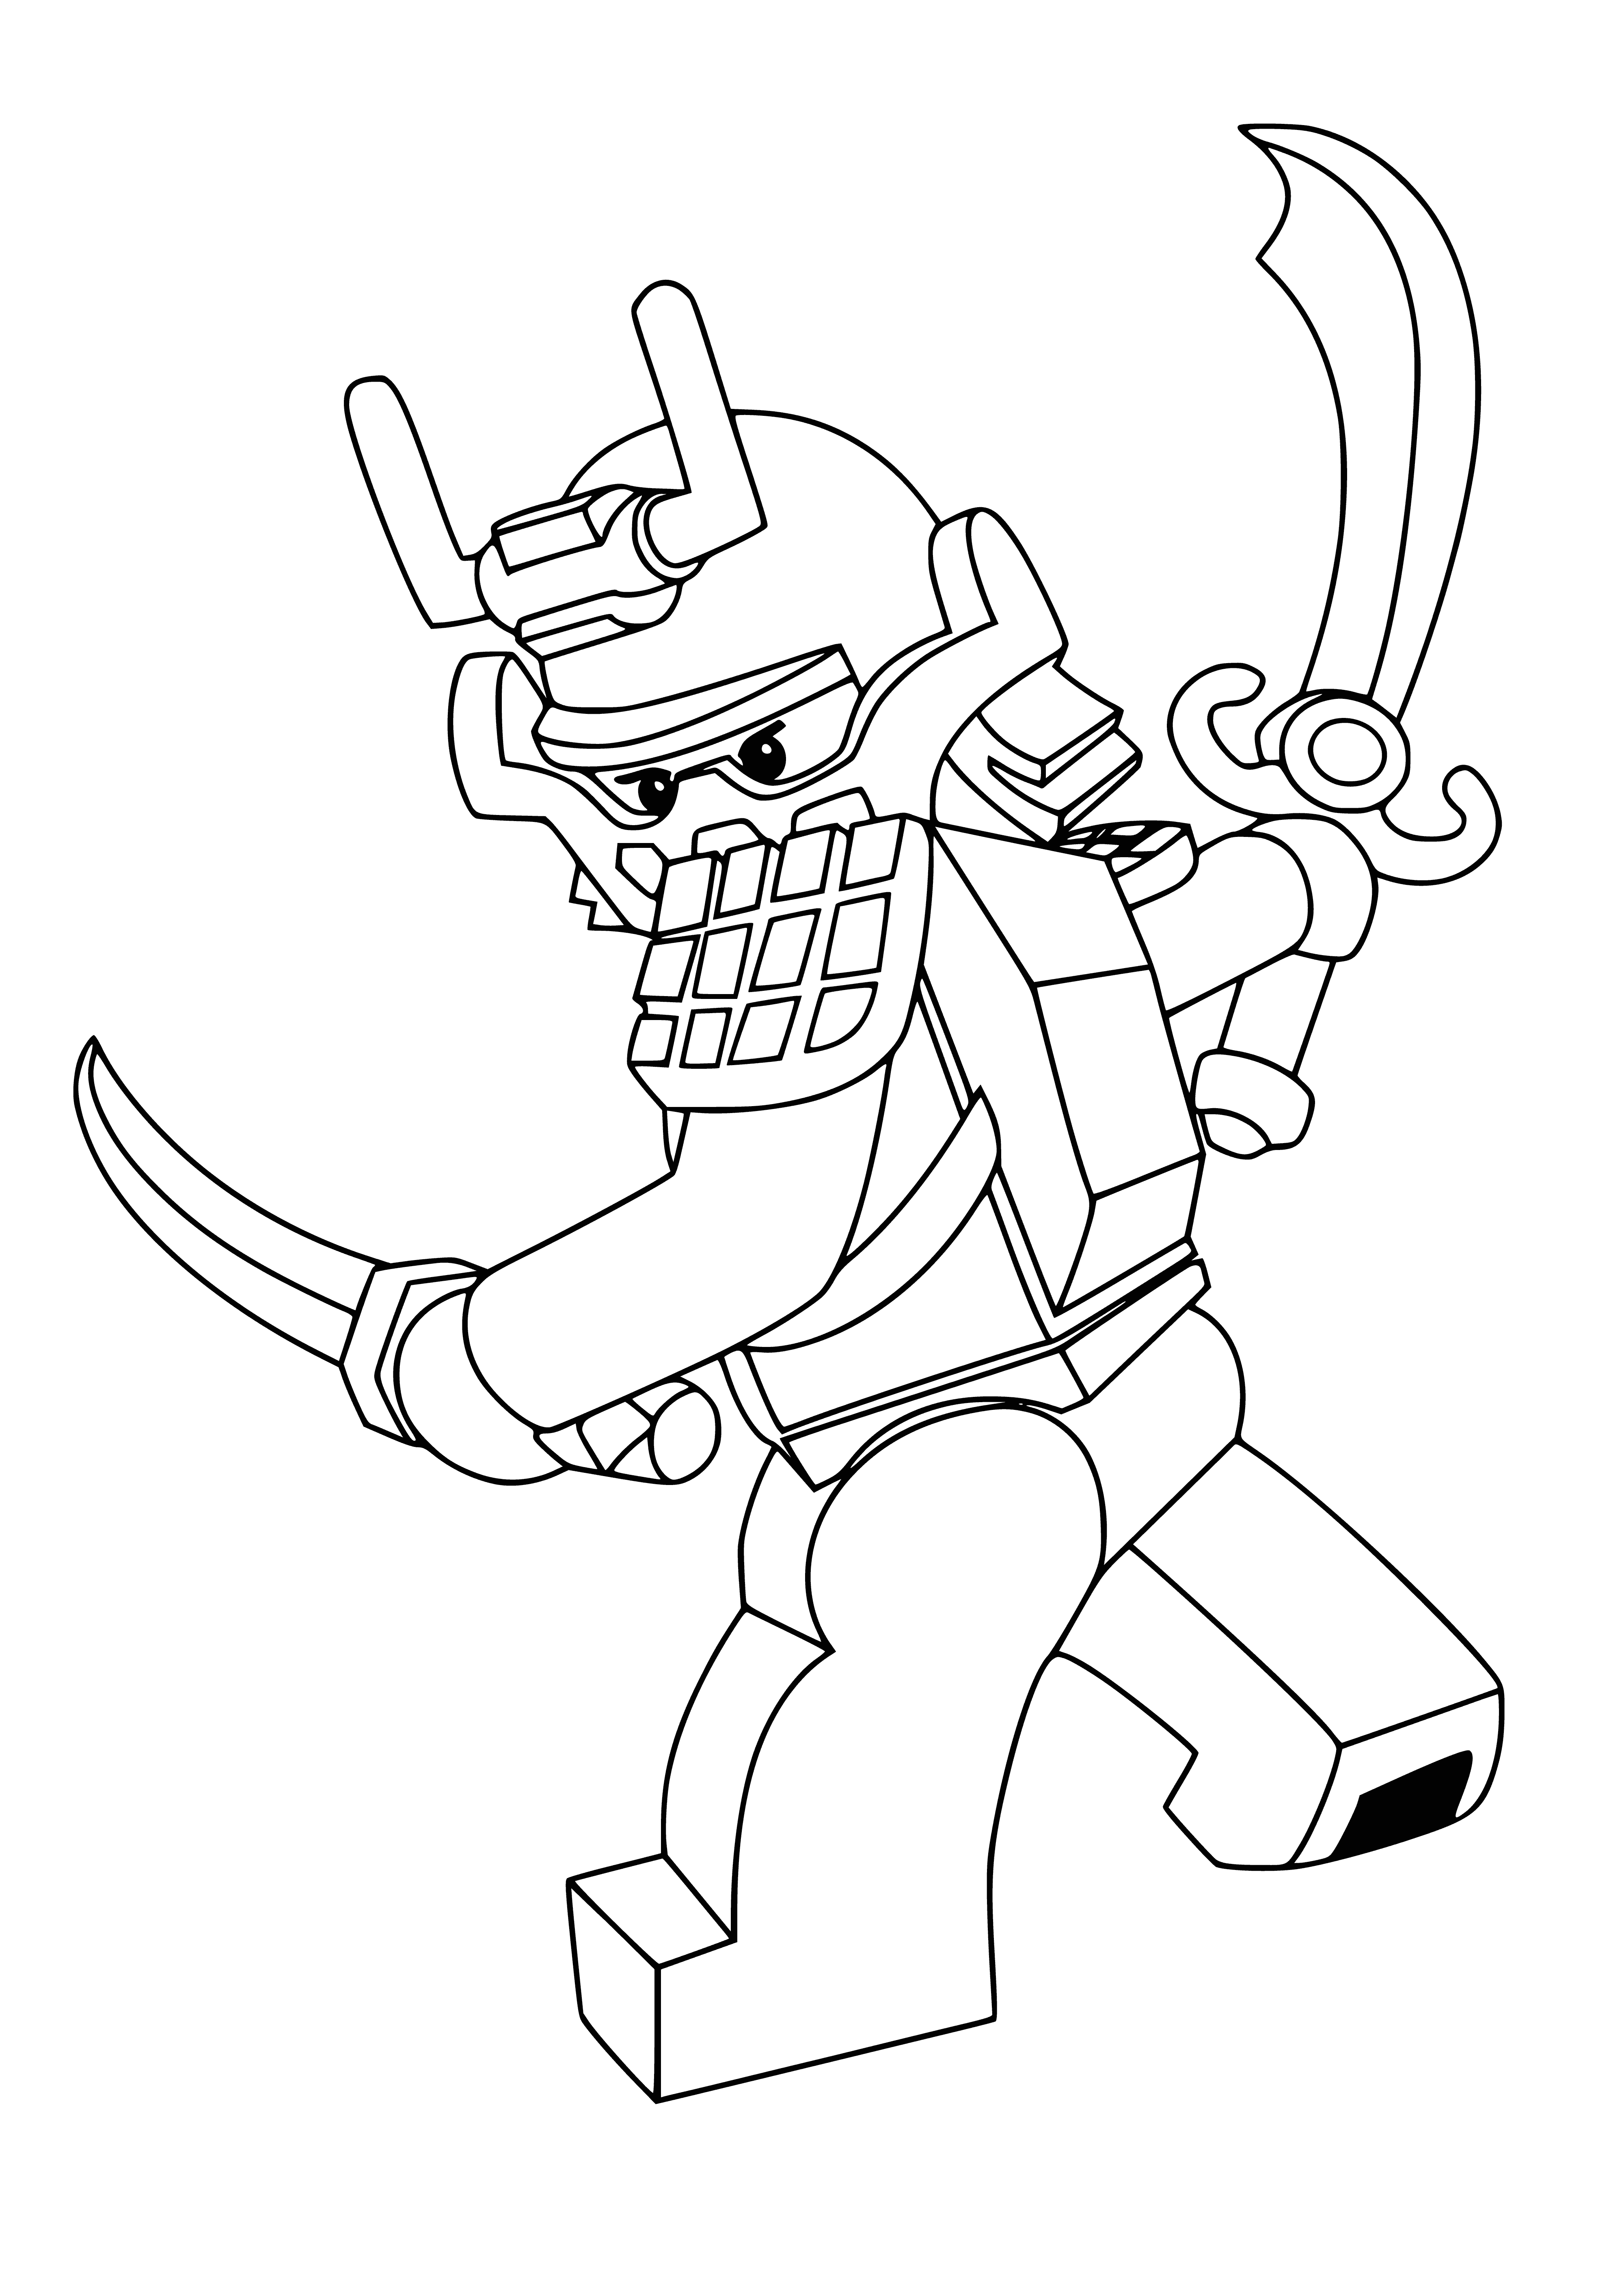 coloring page: Ninja stands on LEGO platform, wielding sword and shield in LEGO suit with hood.